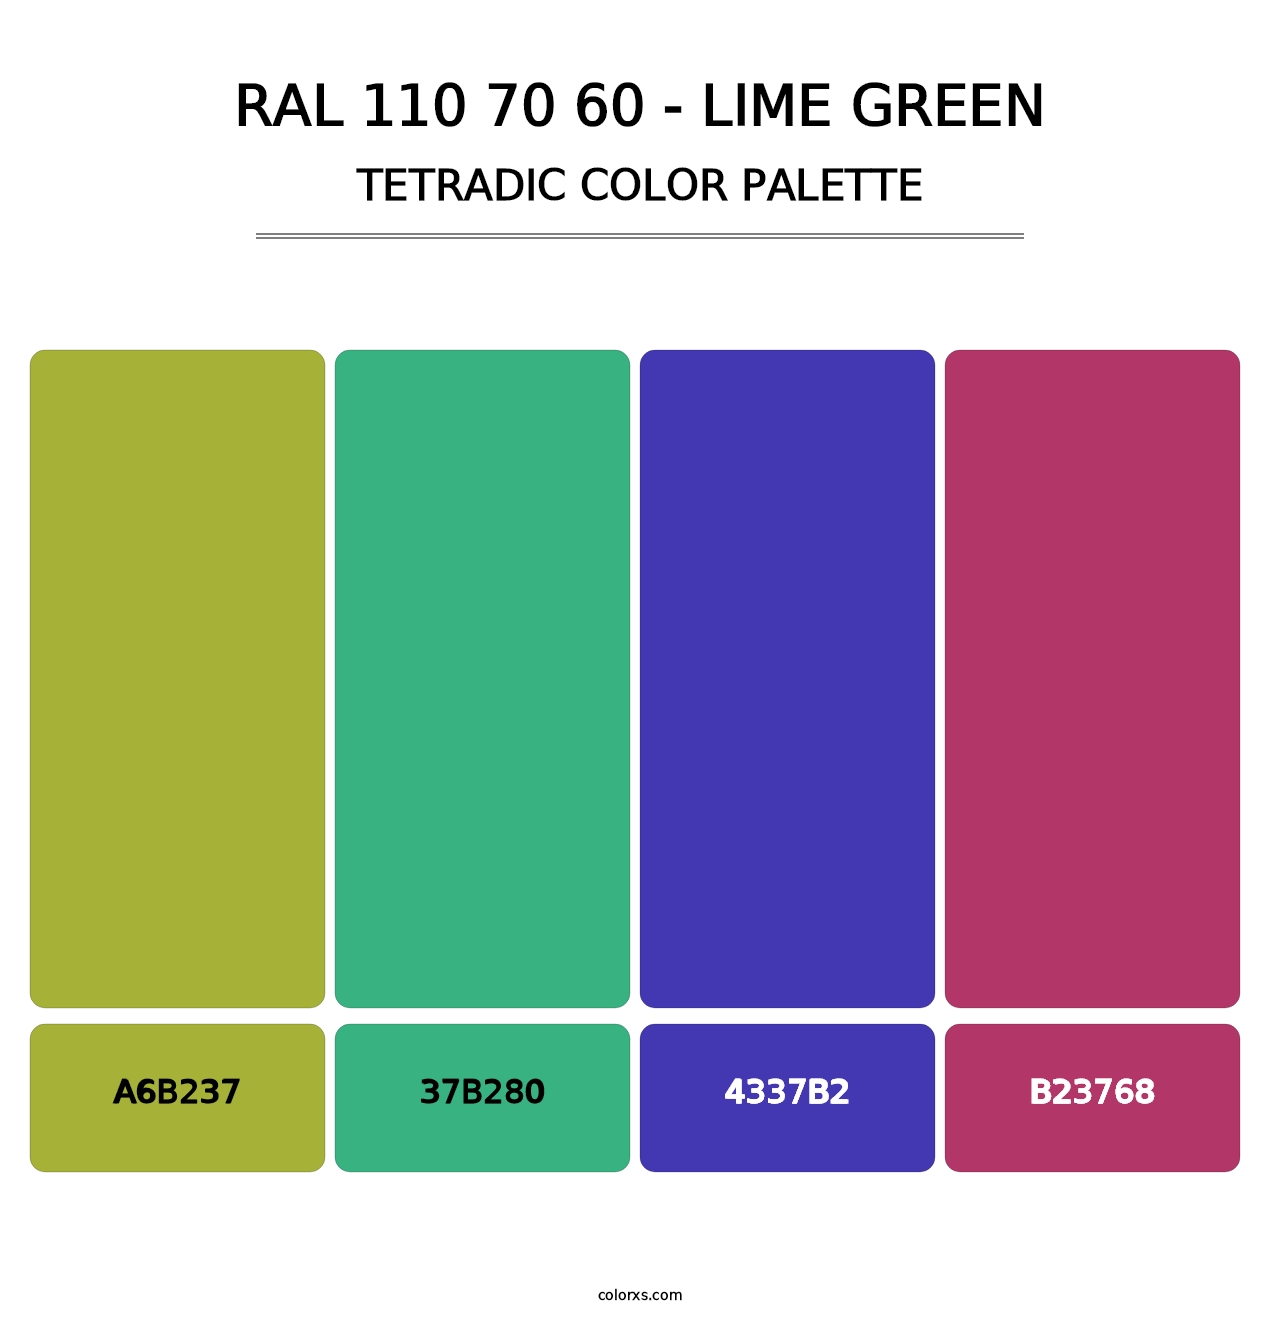 RAL 110 70 60 - Lime Green - Tetradic Color Palette